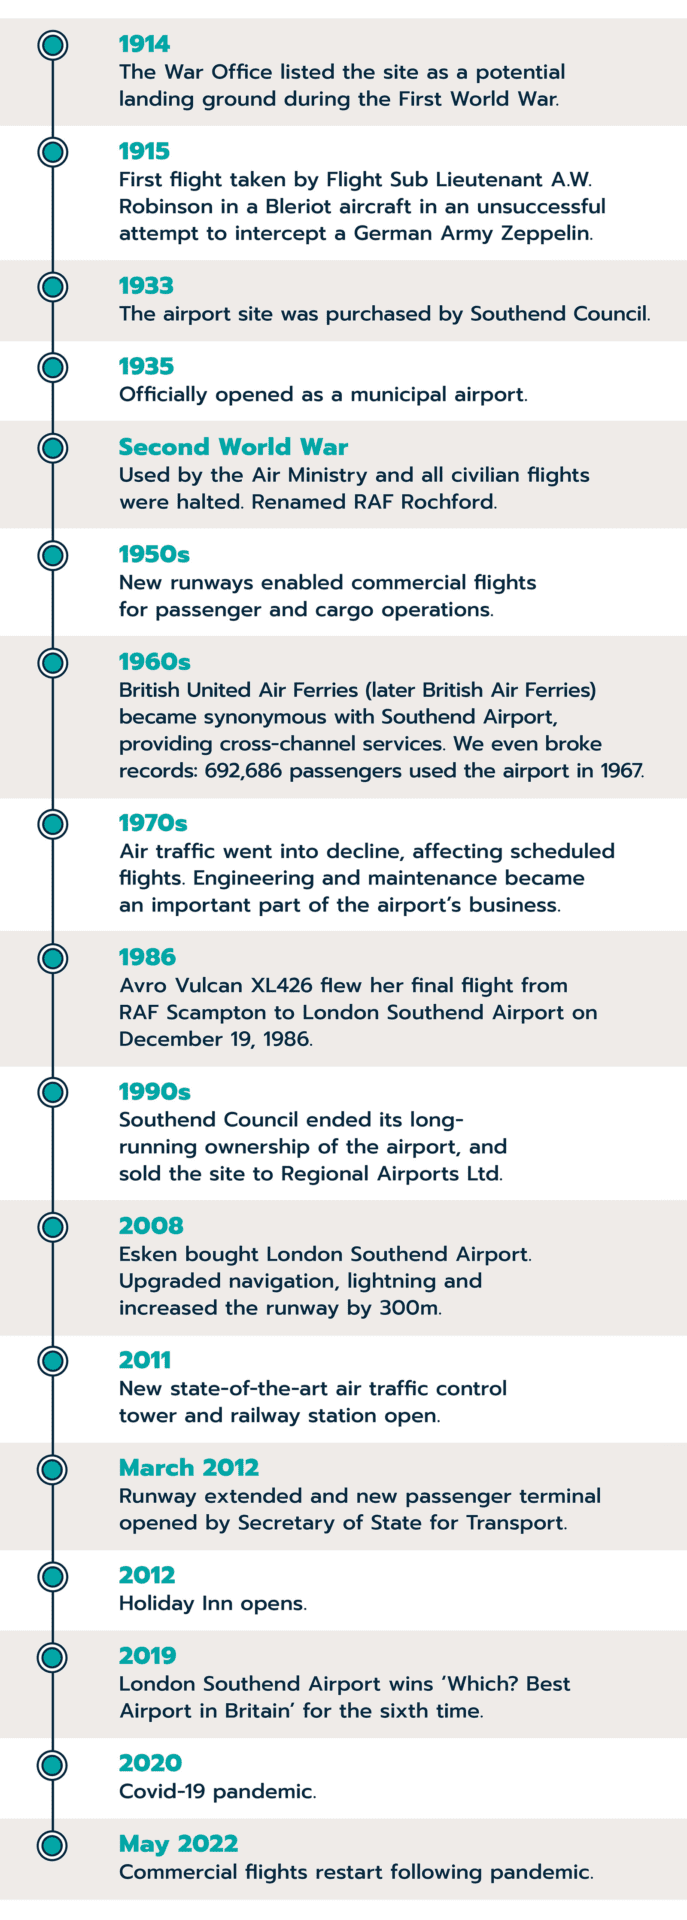 London Southend Airport's timeline, from when the War Office listed the airport as a potential landing ground during the First World War in 194, to when it was officially opened as a municipal airport in 1935, Esken purchasing the airport in 2008 and beyond.